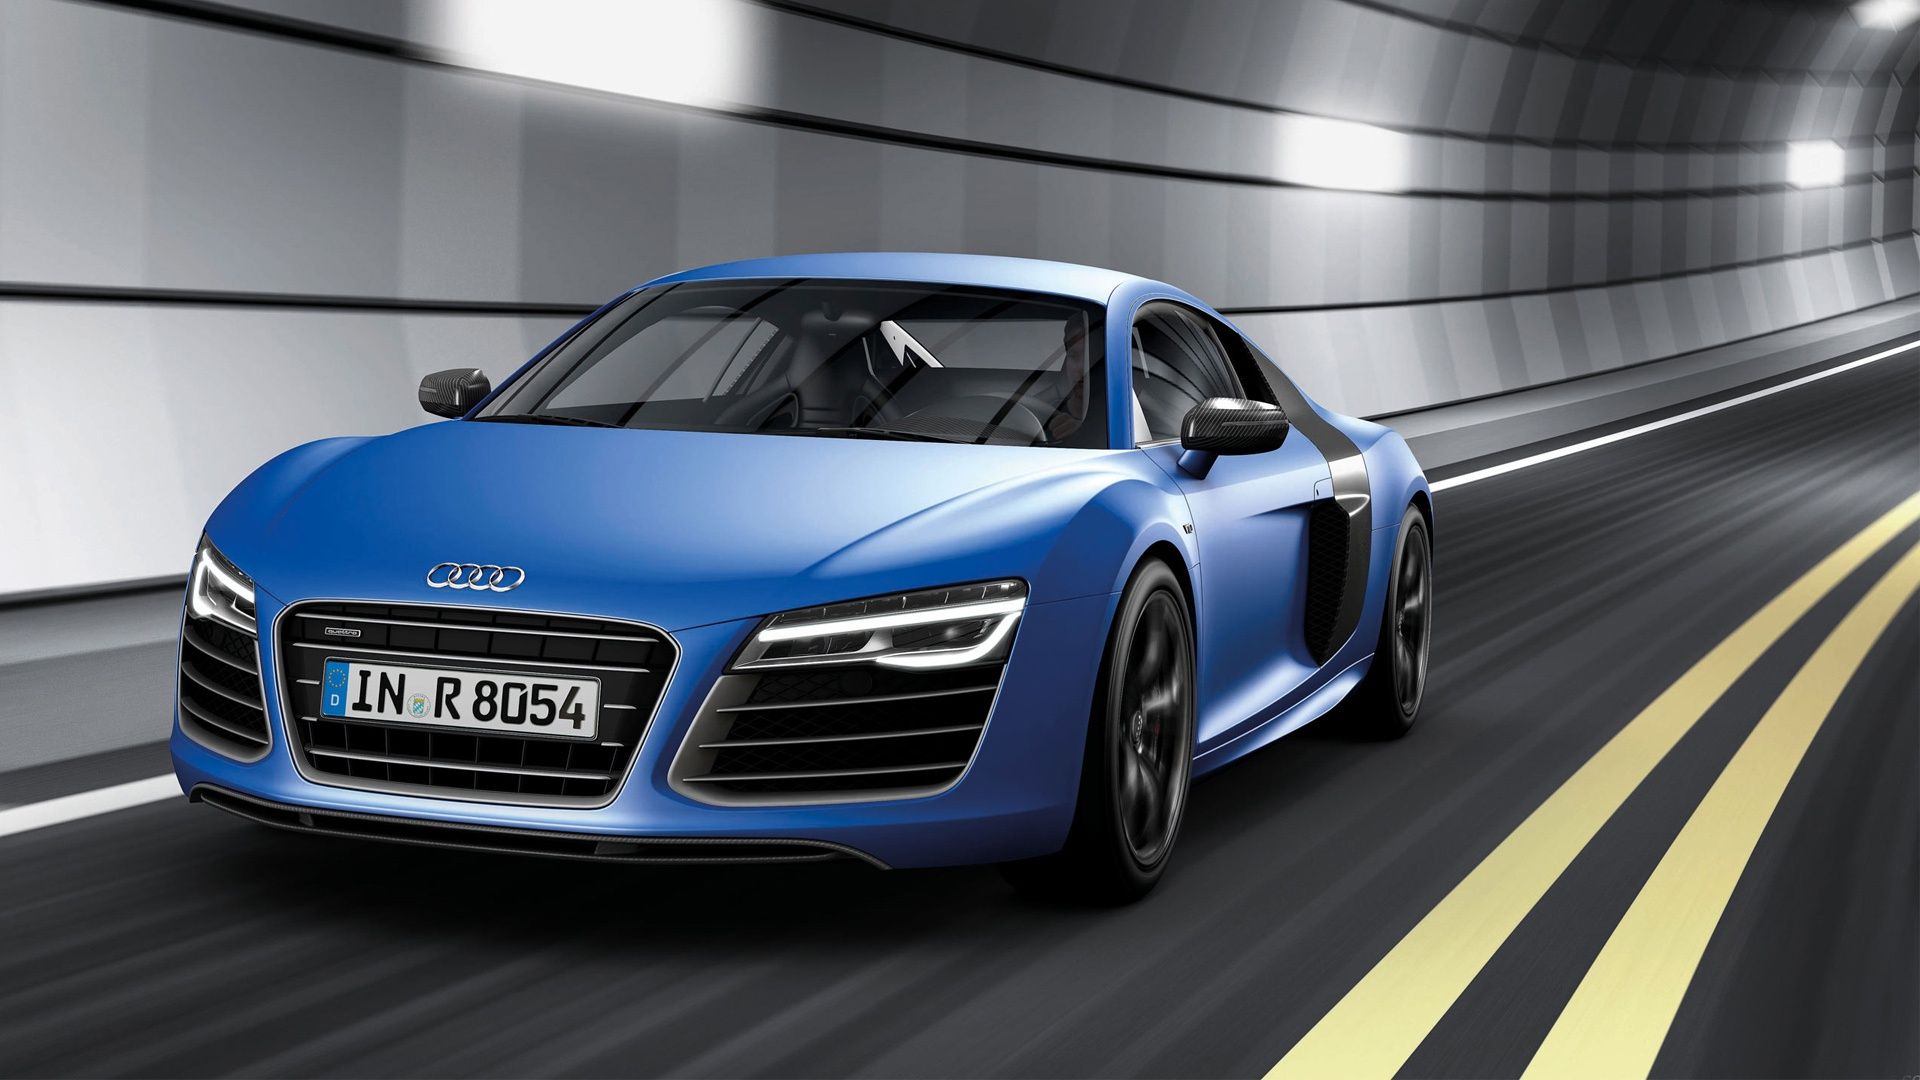 2013 Audi R8 V8 Wallpapers | HD Wallpapers